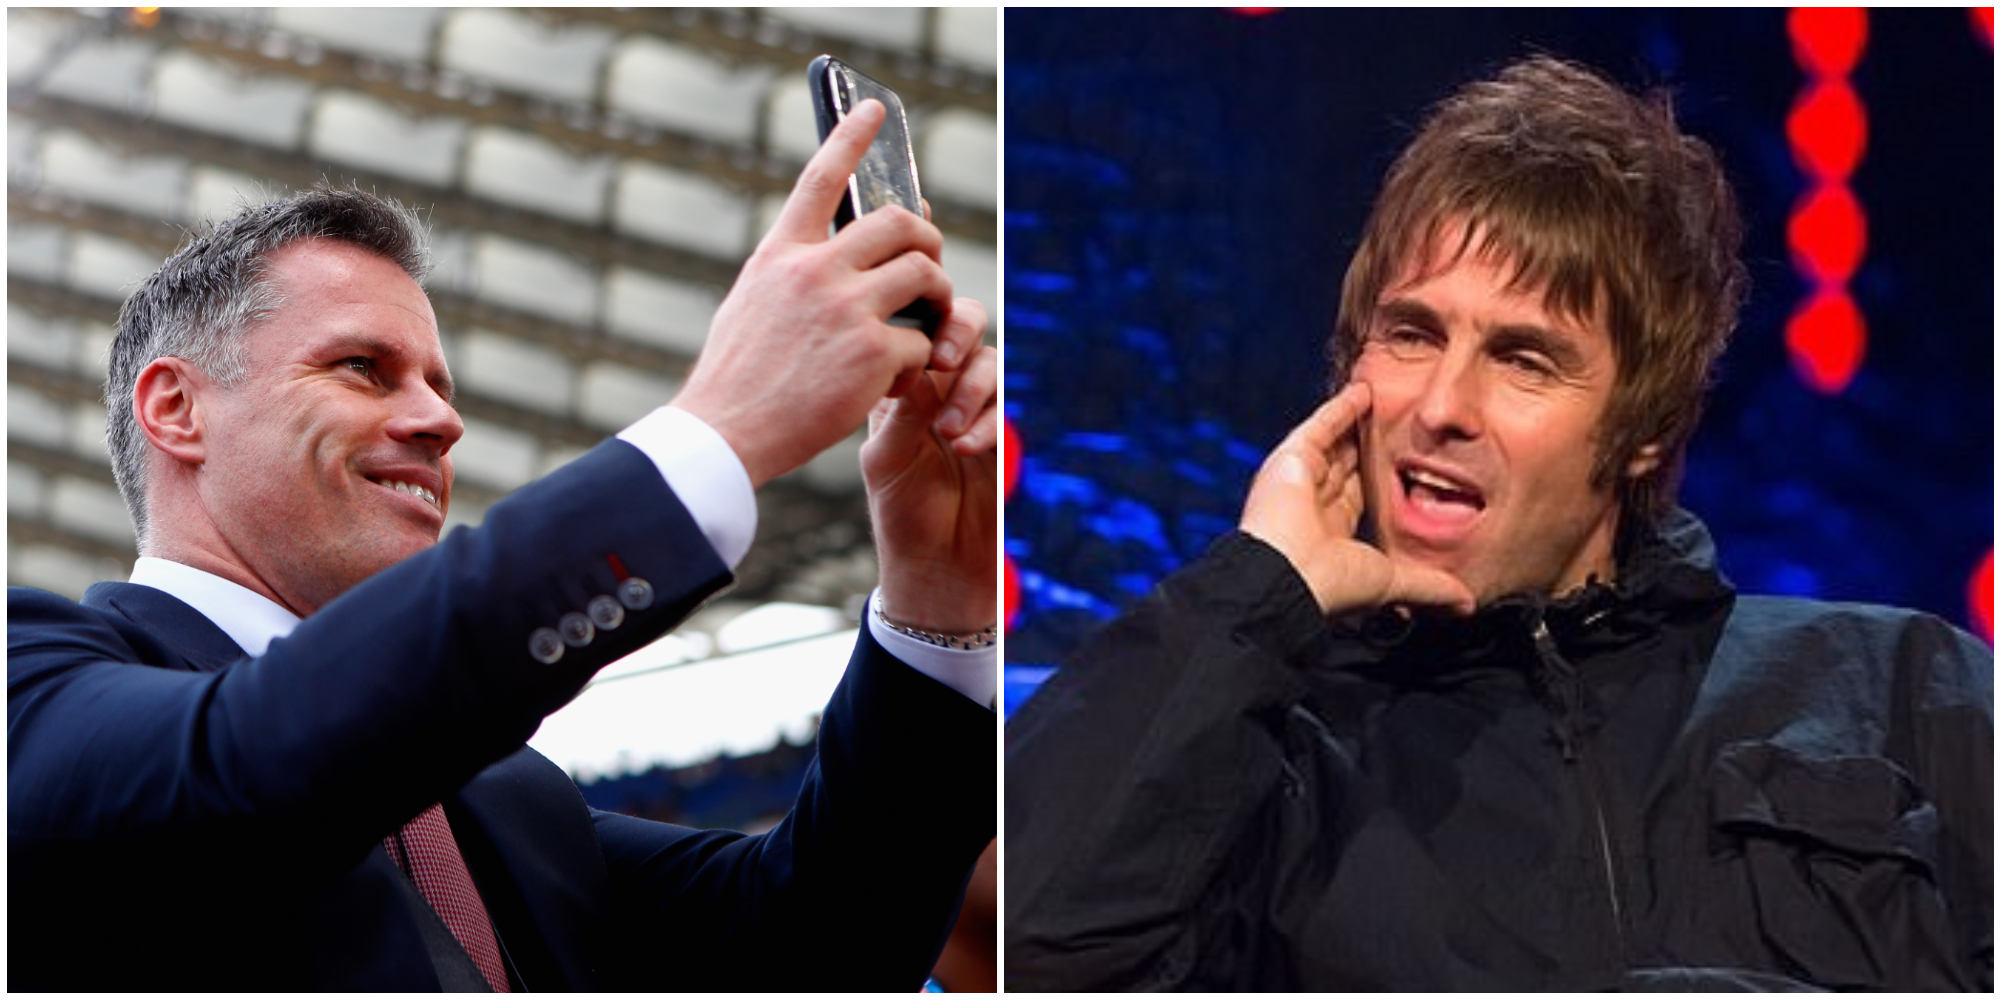 ‘Oasis are s**te’ – Jamie Carragher issues x-rated putdown response to Liam Gallagher after Man City win PL